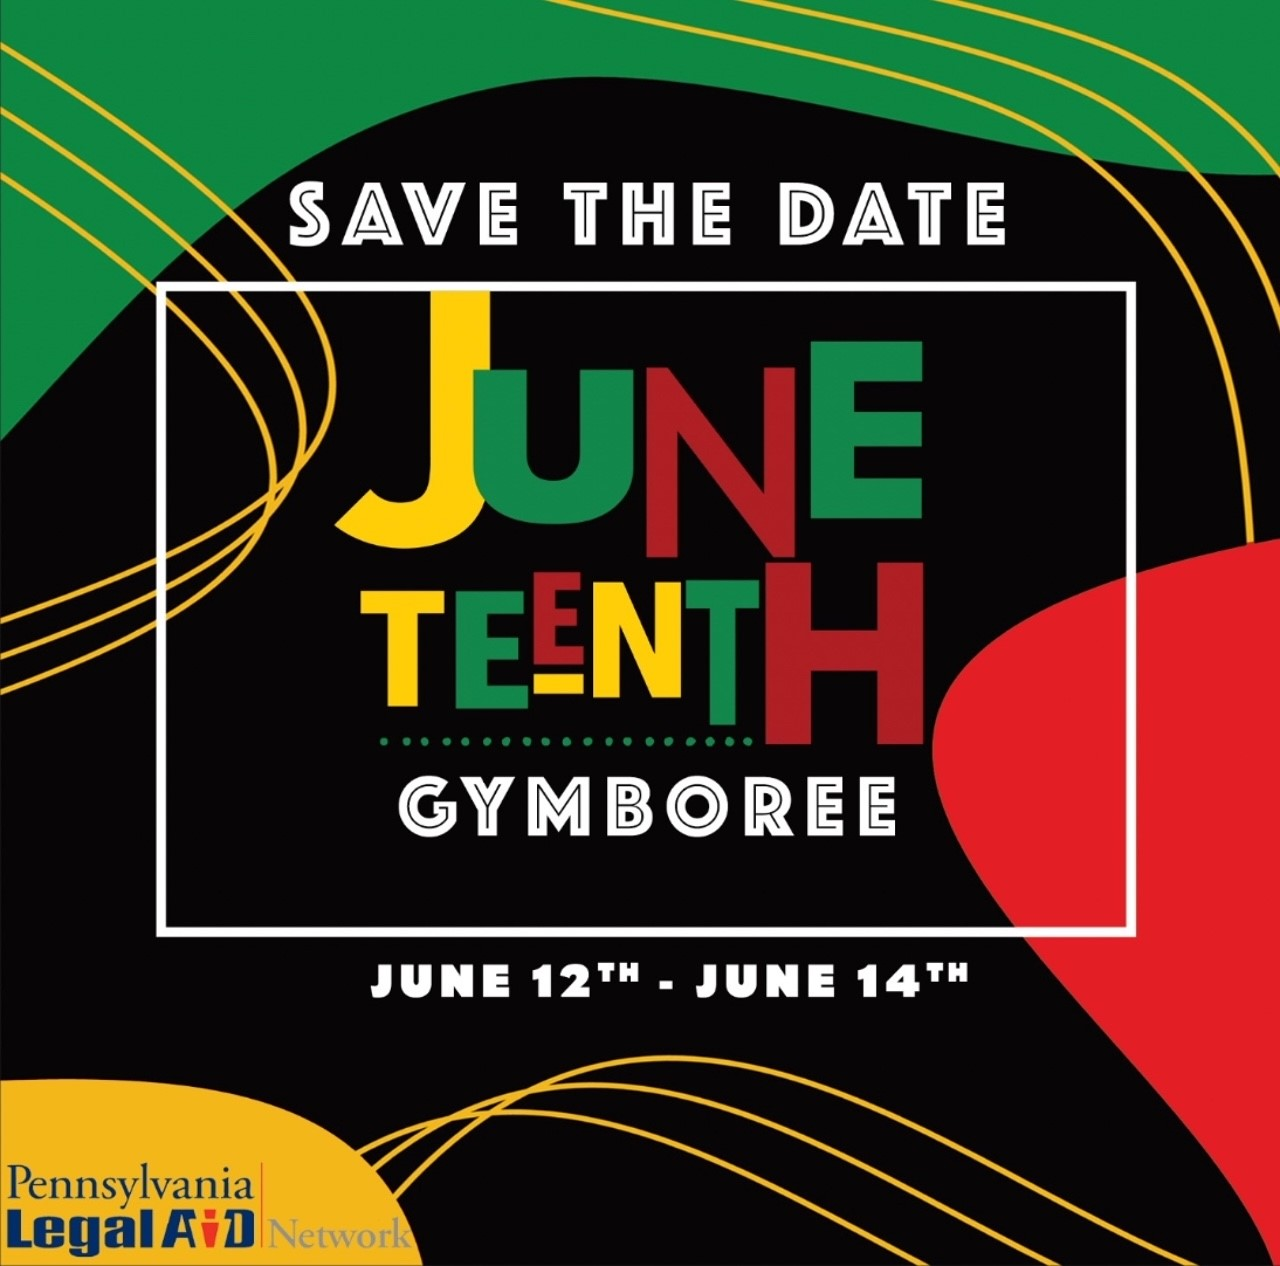 Save The Date - Juneteenth Gymboree, June 12-14